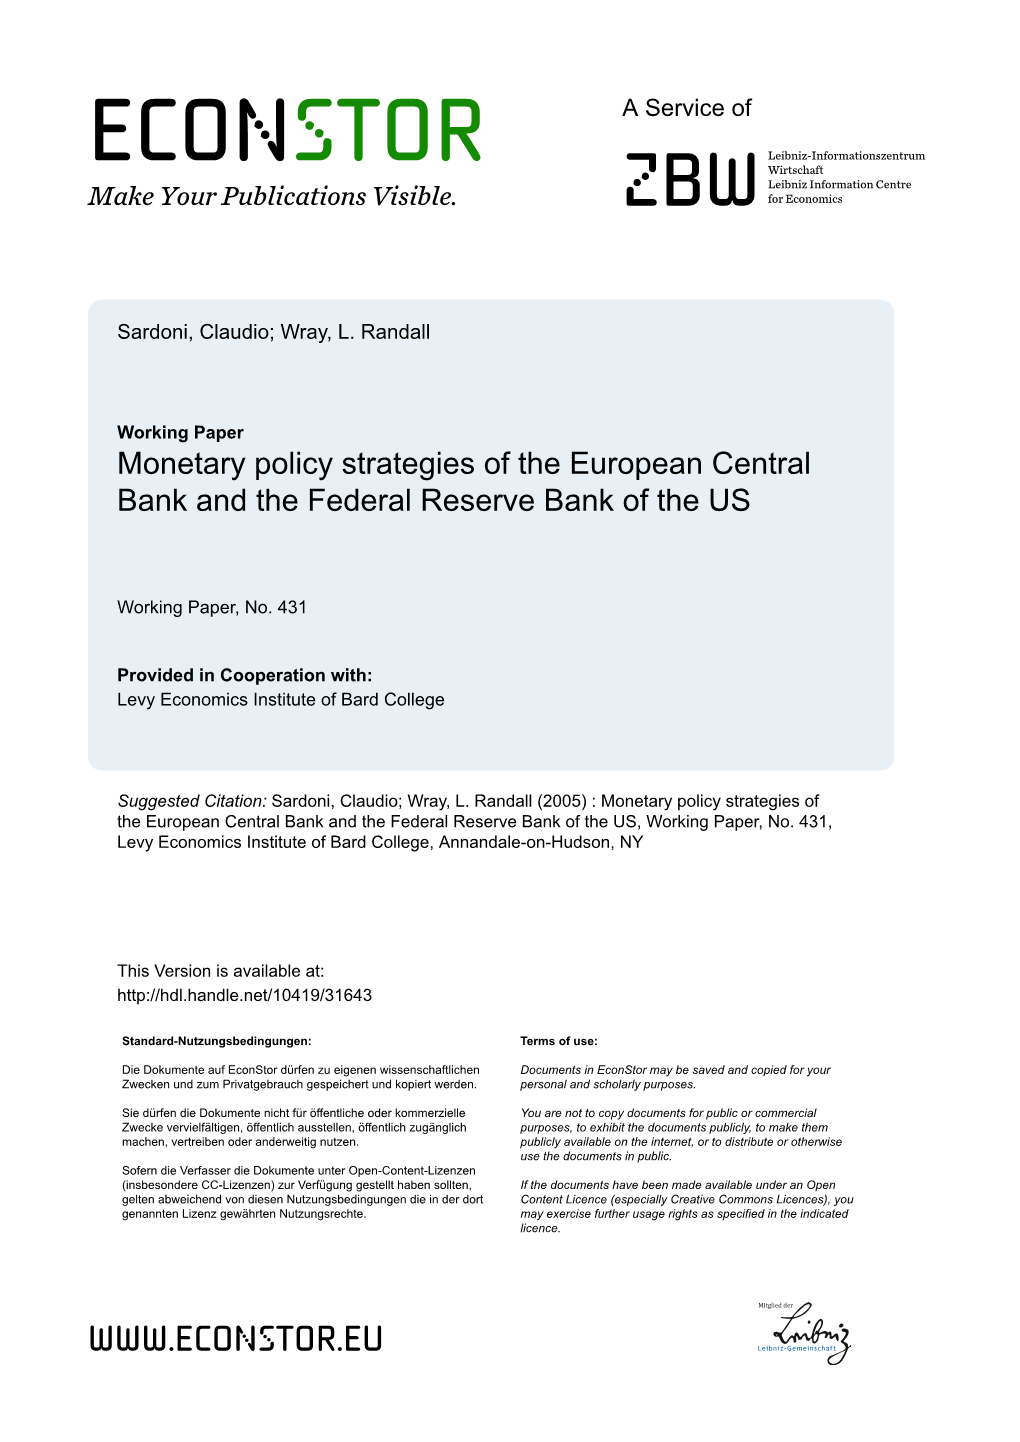 Monetary Policy Strategies of the European Central Bank and the Federal Reserve Bank of the US